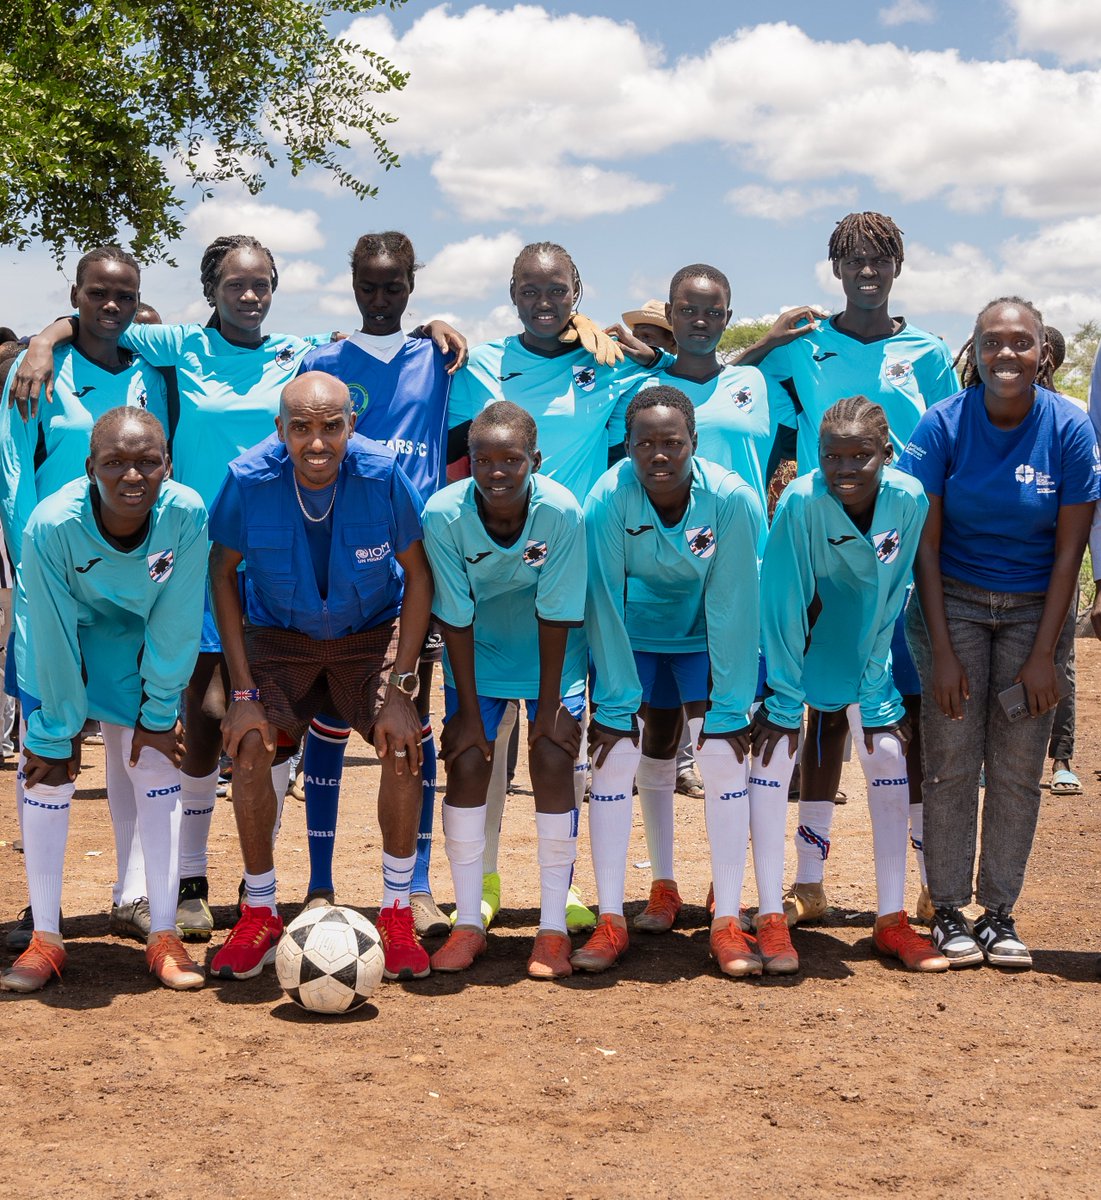 Sports are close to the heart of young people in Kakuma, leading to a sense of belonging. IOM Global Goodwill Ambassador @Mo_Farah witnessed this as he visited migrant communities today, advocating for sports for inclusion and development. #IOMOntheMove #ScoreWithMo4Migration